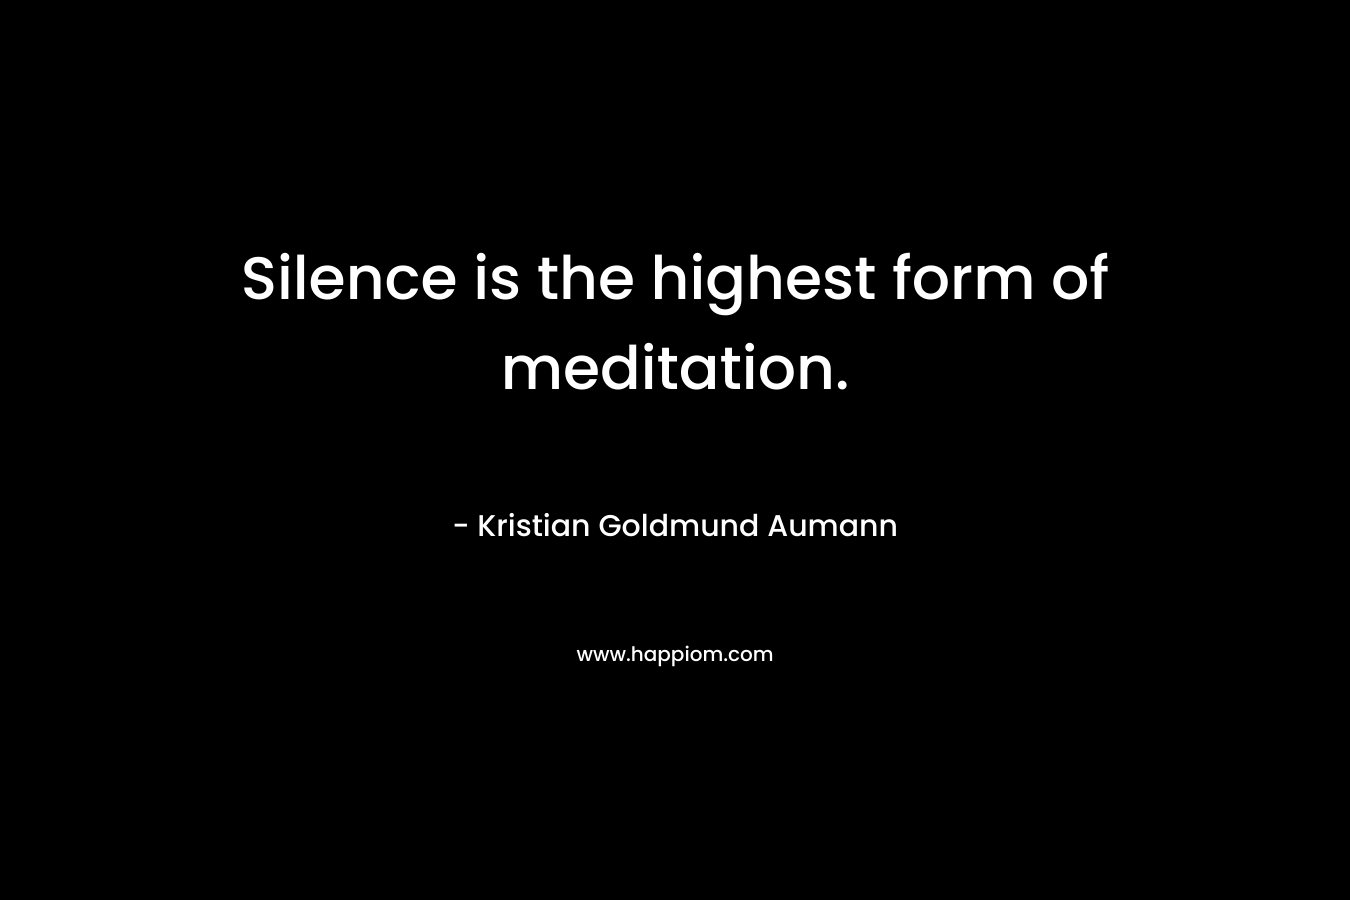 Silence is the highest form of meditation.